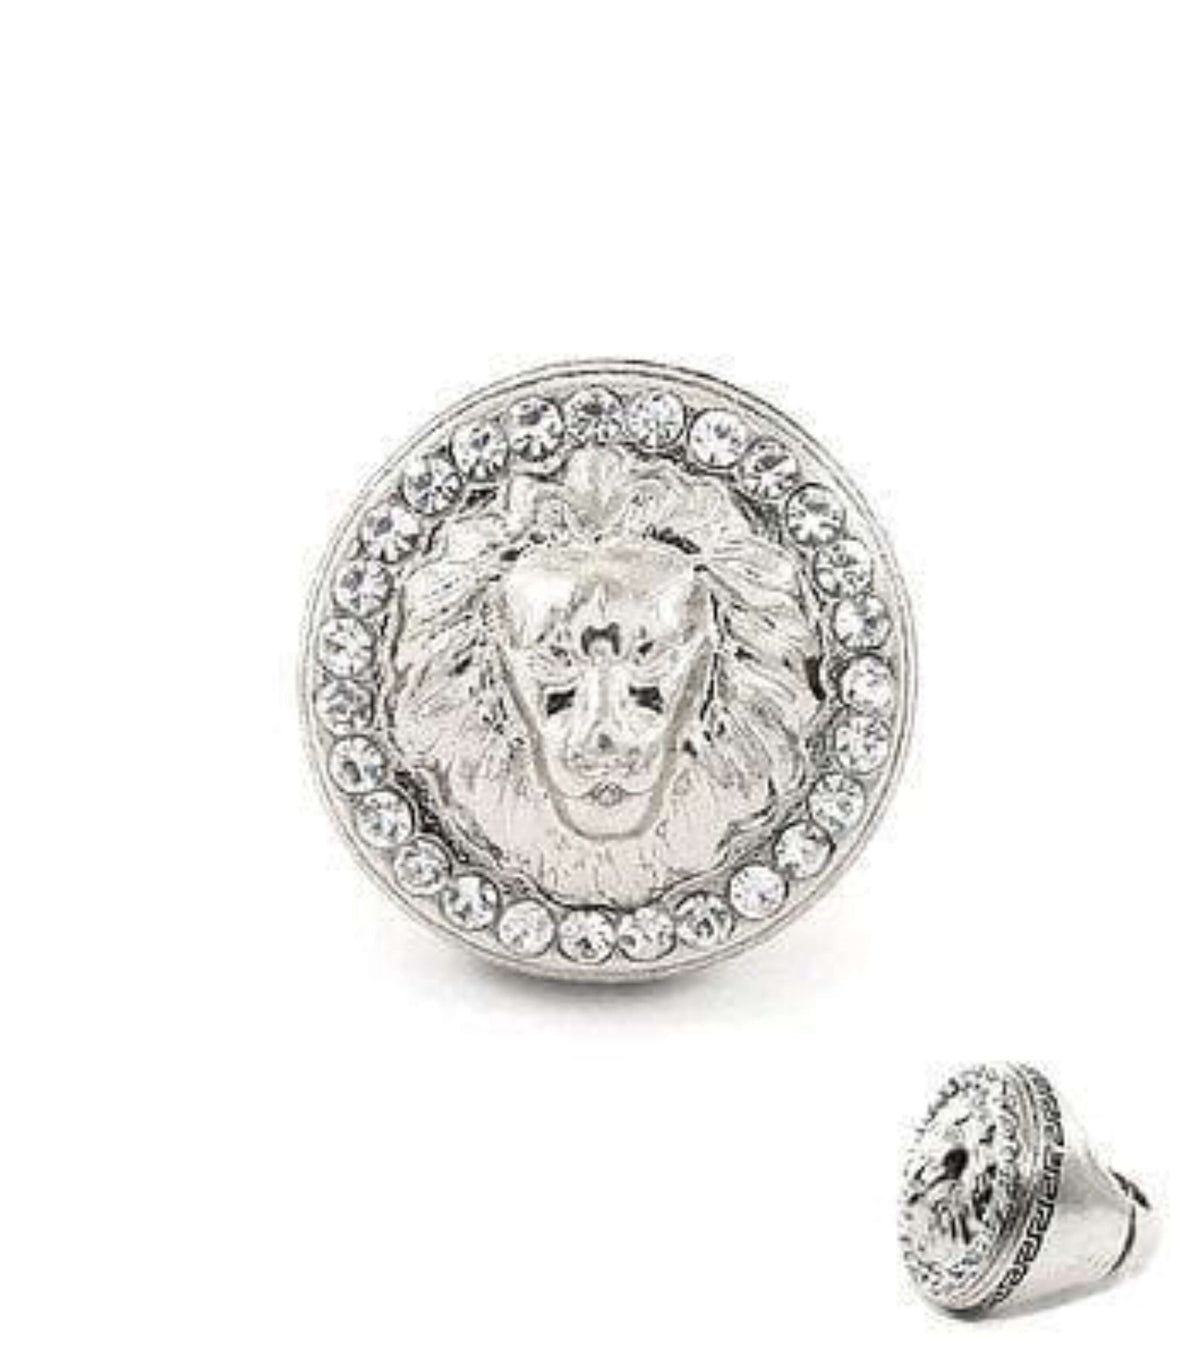 Lion Ring that Stretches - The House of Awareness